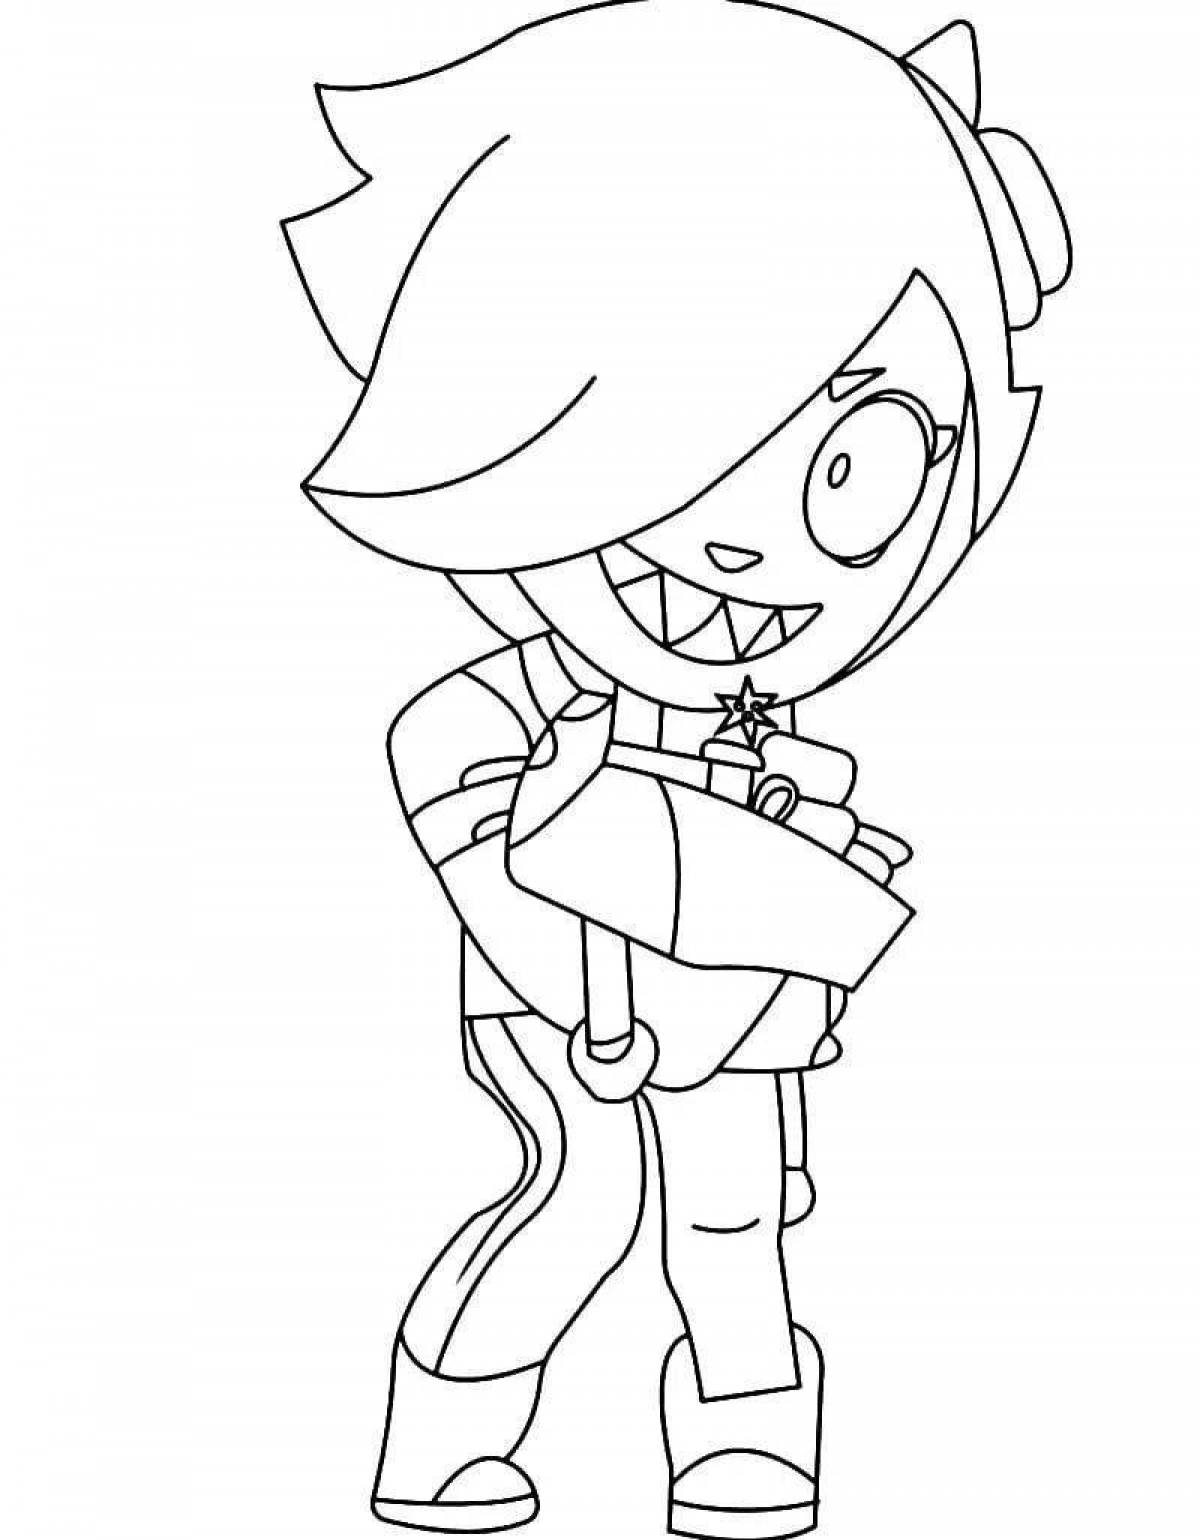 Coloring page adorable brastars